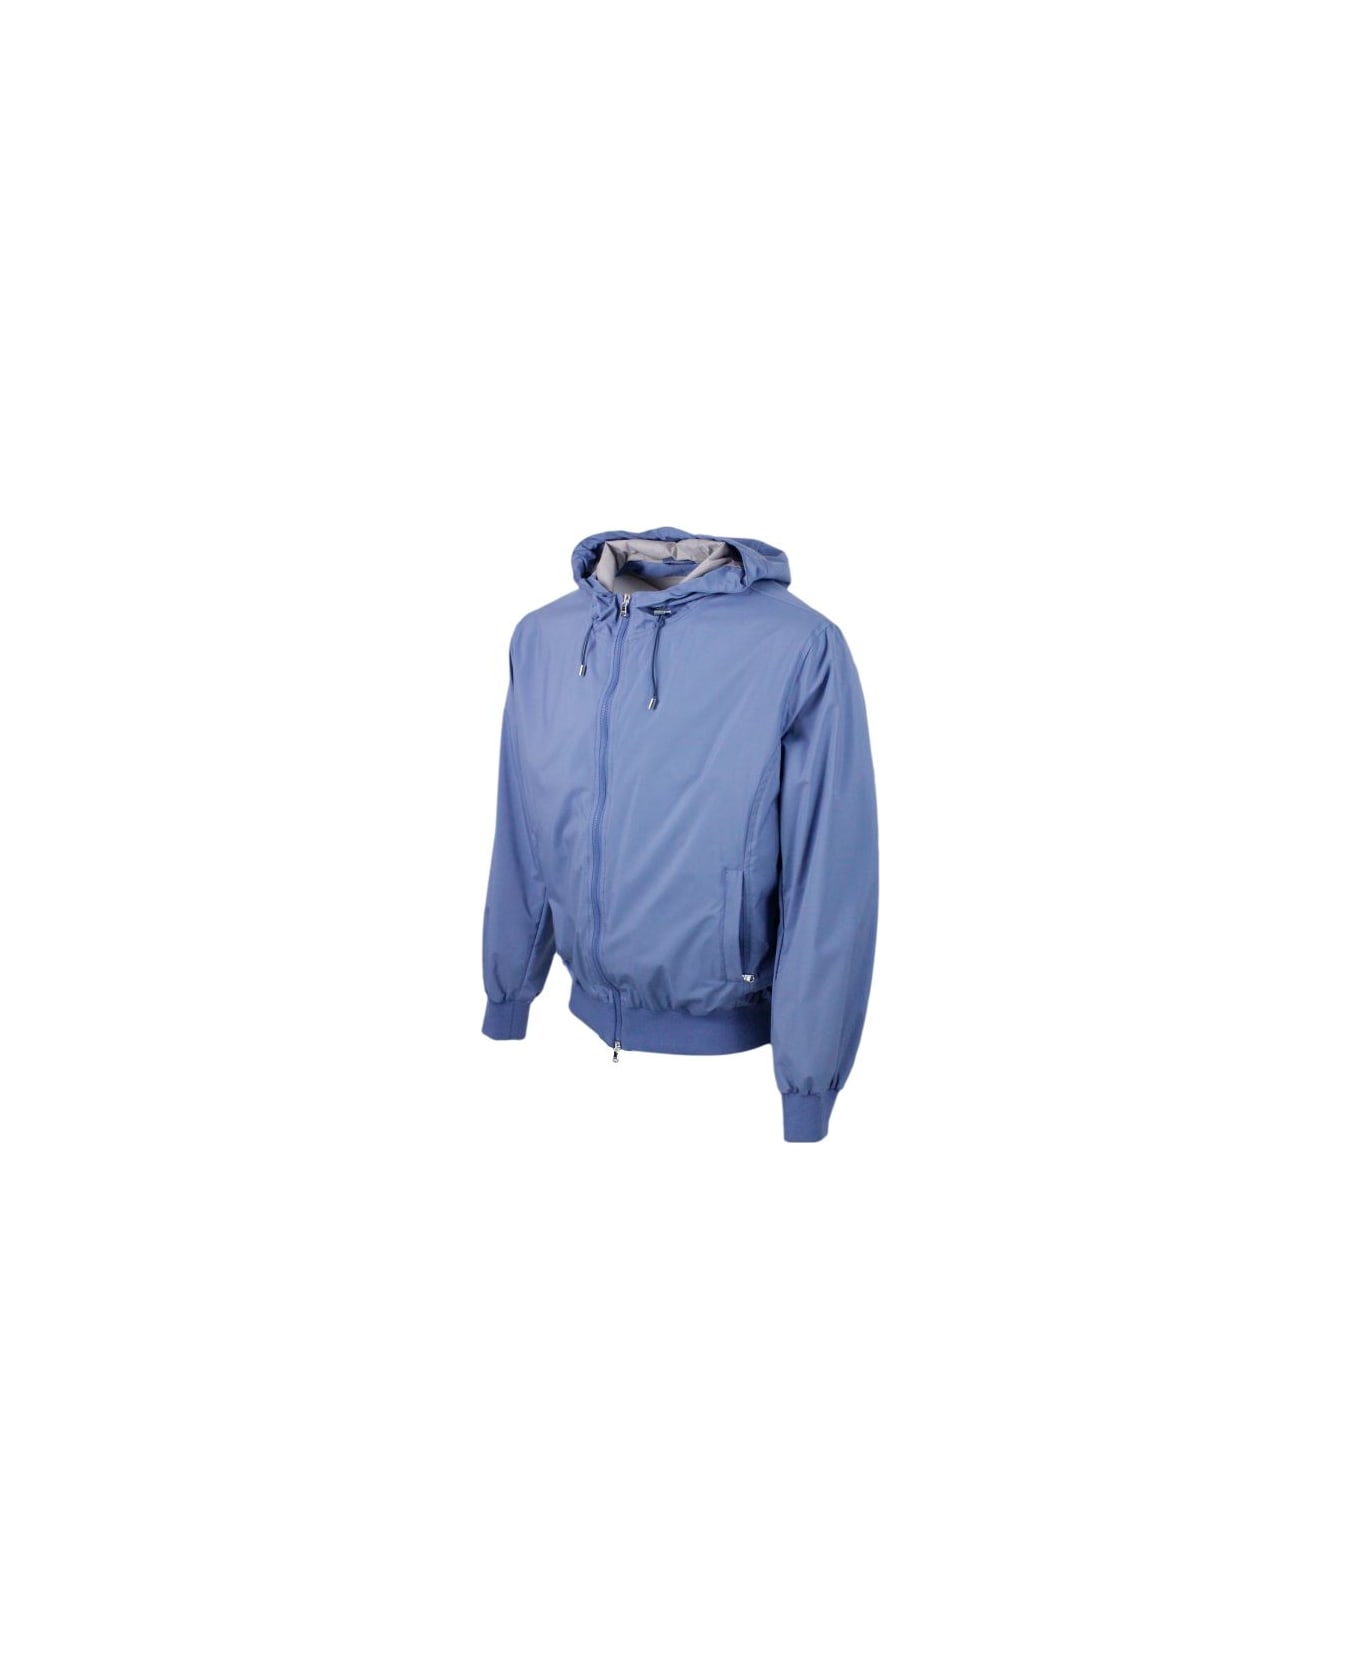 Barba Napoli Lightweight Bomber Jacket In Windproof Technical Fabric With Hood With Zip Closure And Knitted Cuffs And Bottom. - Blu light